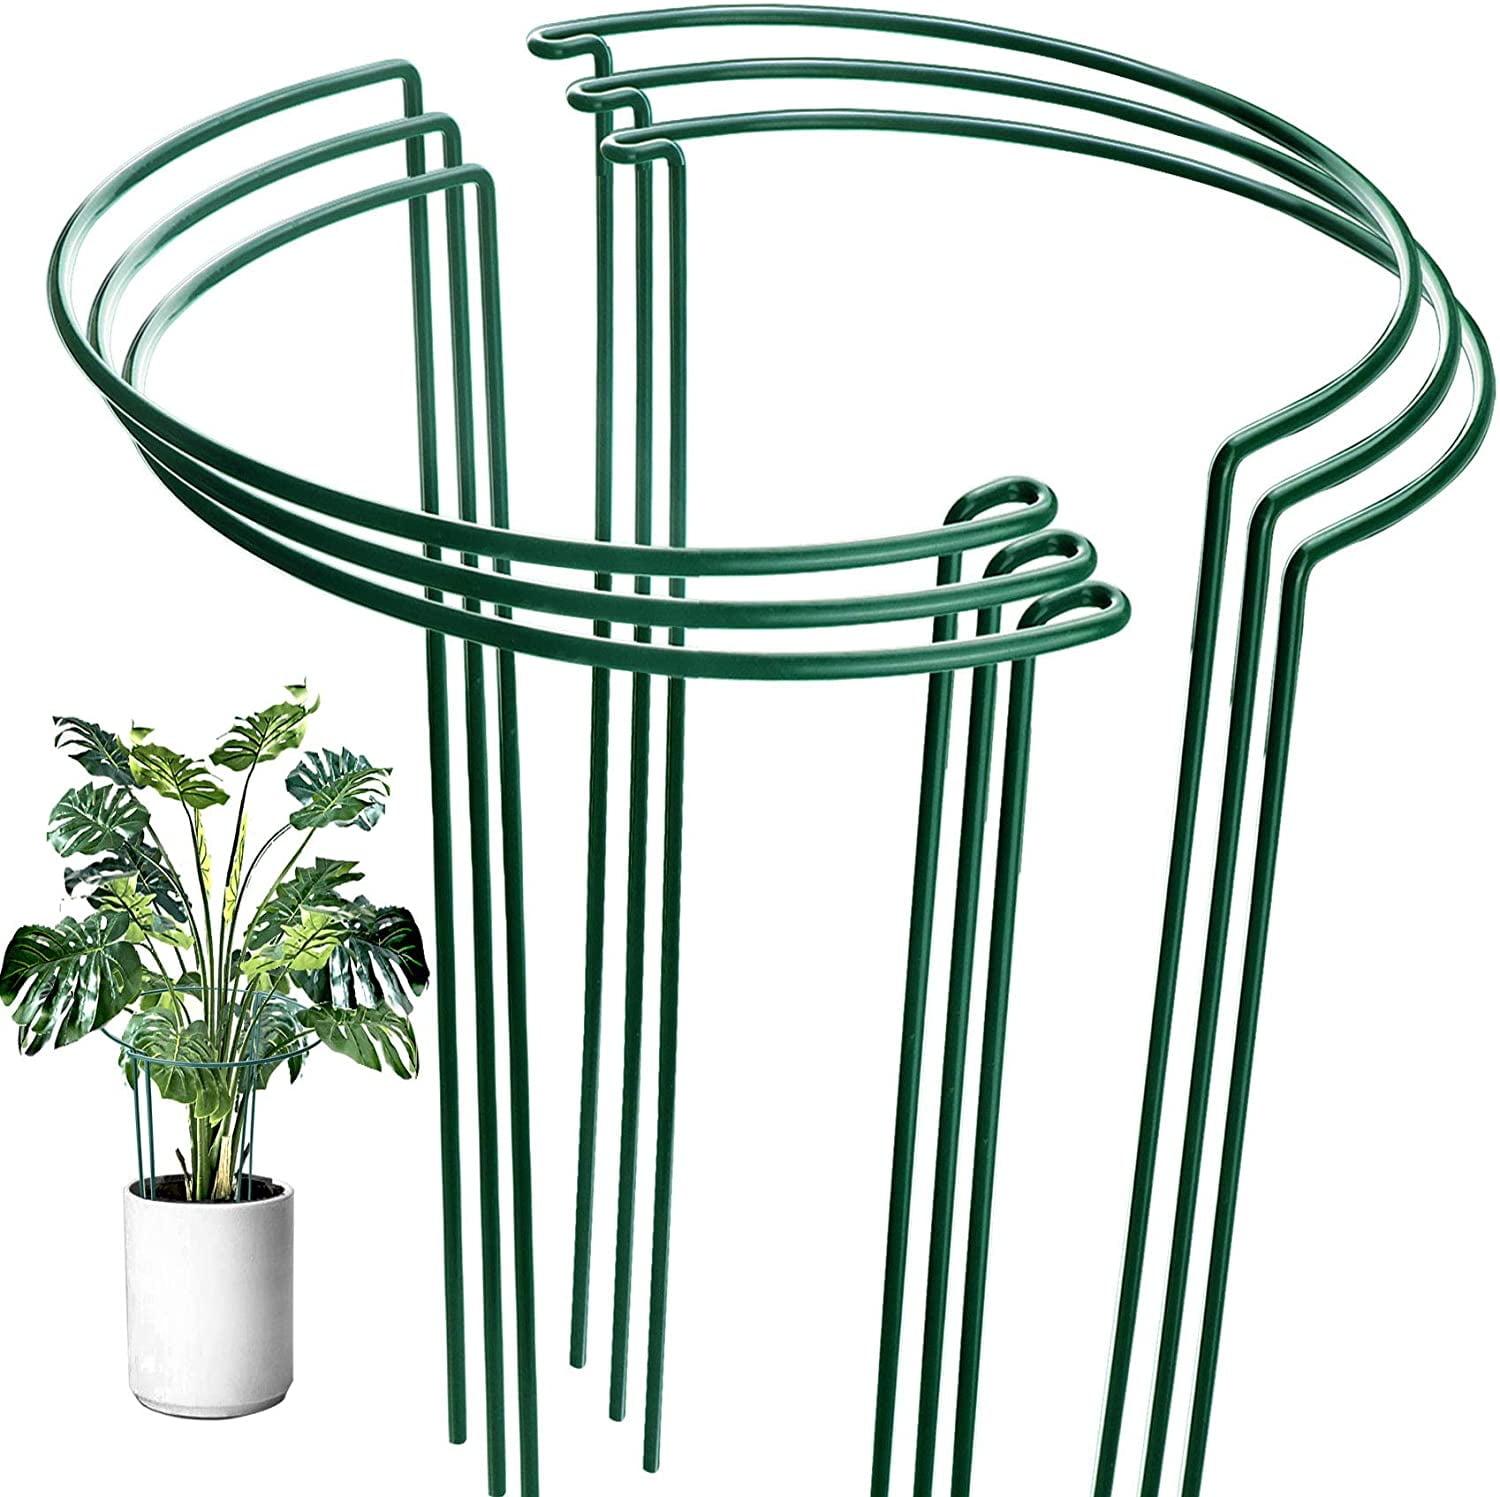 100 X 10 INCH PLANT/ FLOWER SUPPORT RING FOR BAMBOO CANES 25 cm 